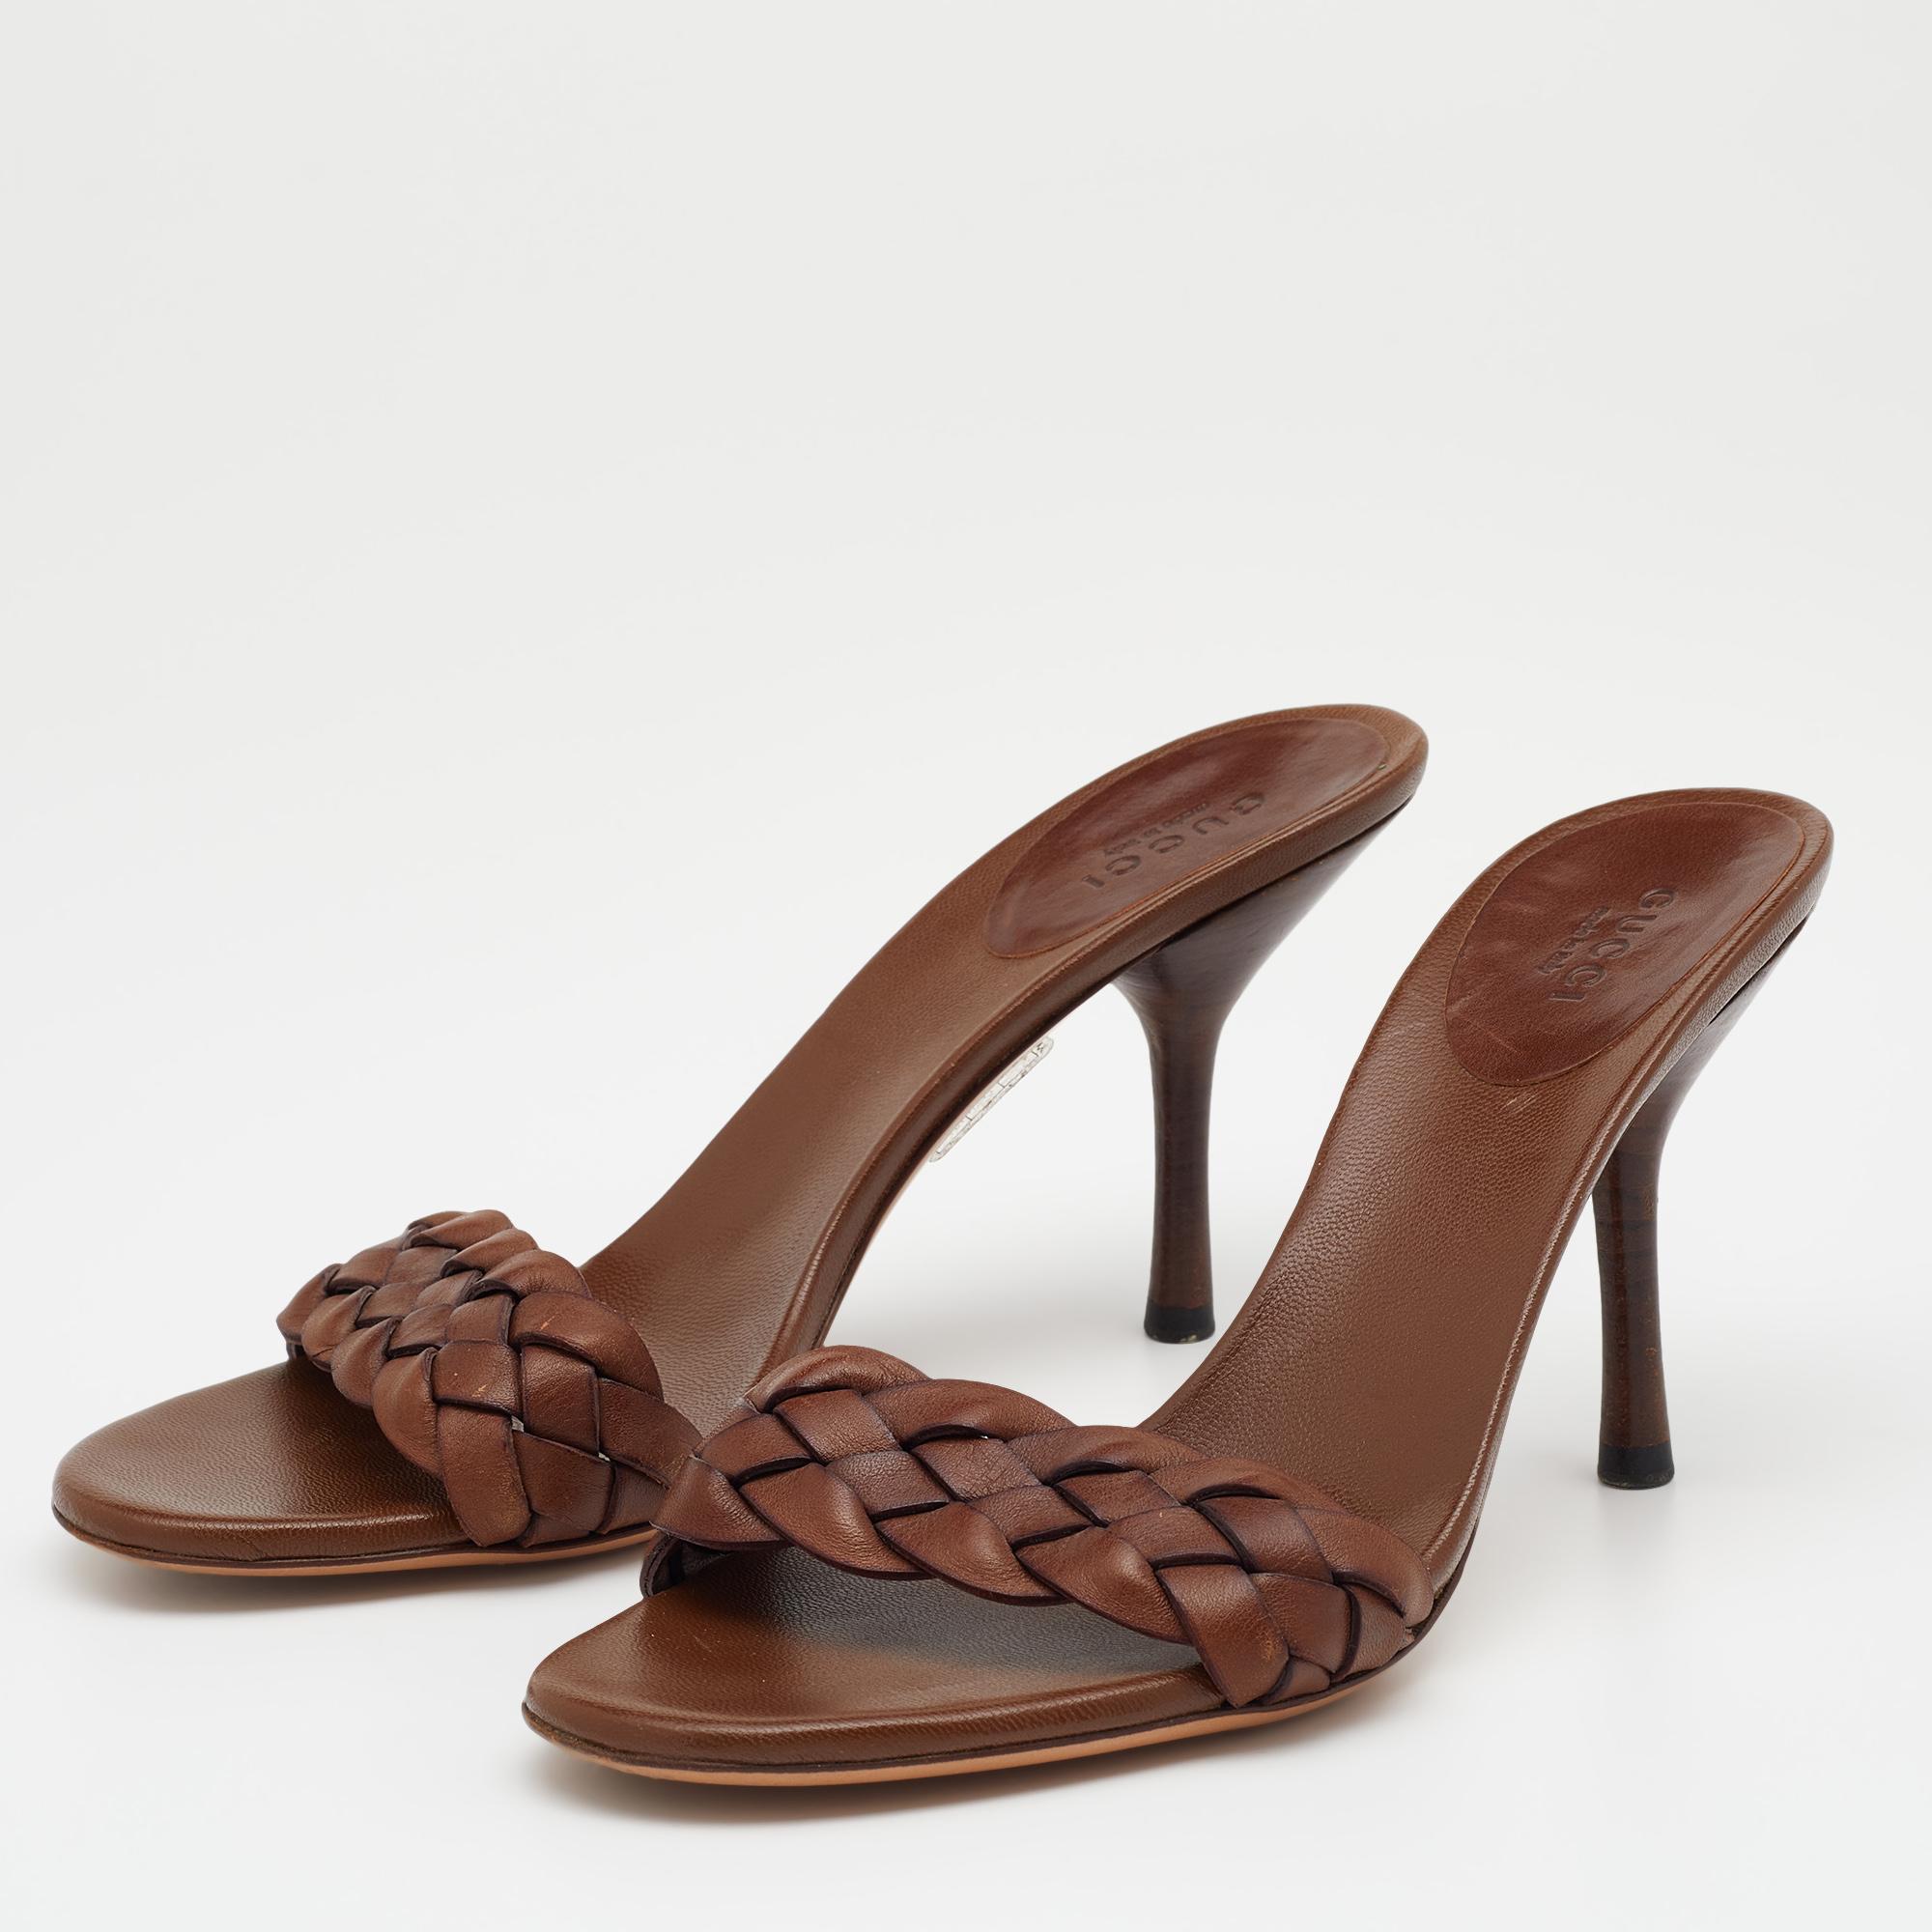 These timeless Gucci sandals are meant to last you season after season. Crafted using brown leather, they are designed with a sleek arch, open toes, and 9 cm heels.

